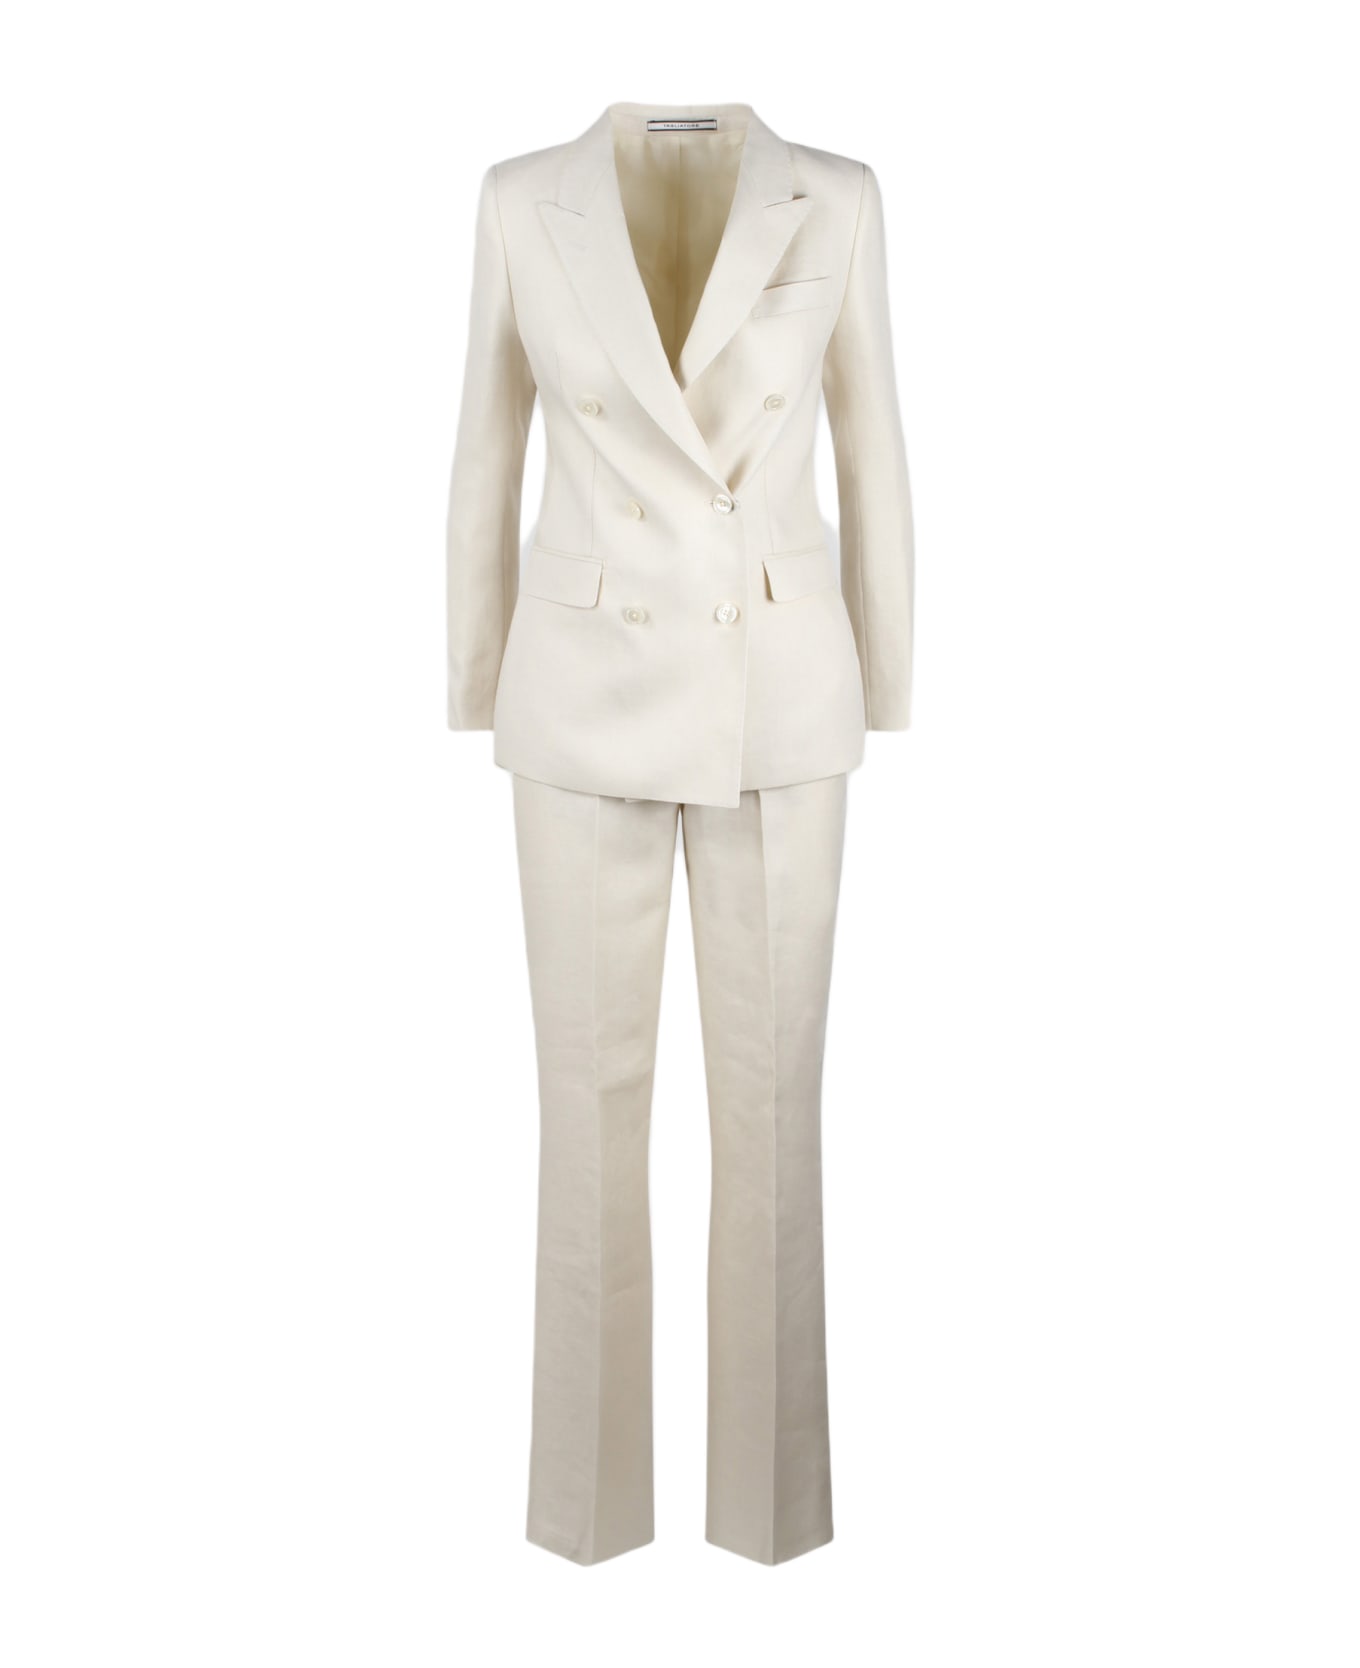 Tagliatore Linen Double Breasted Suit - Nude & Neutrals